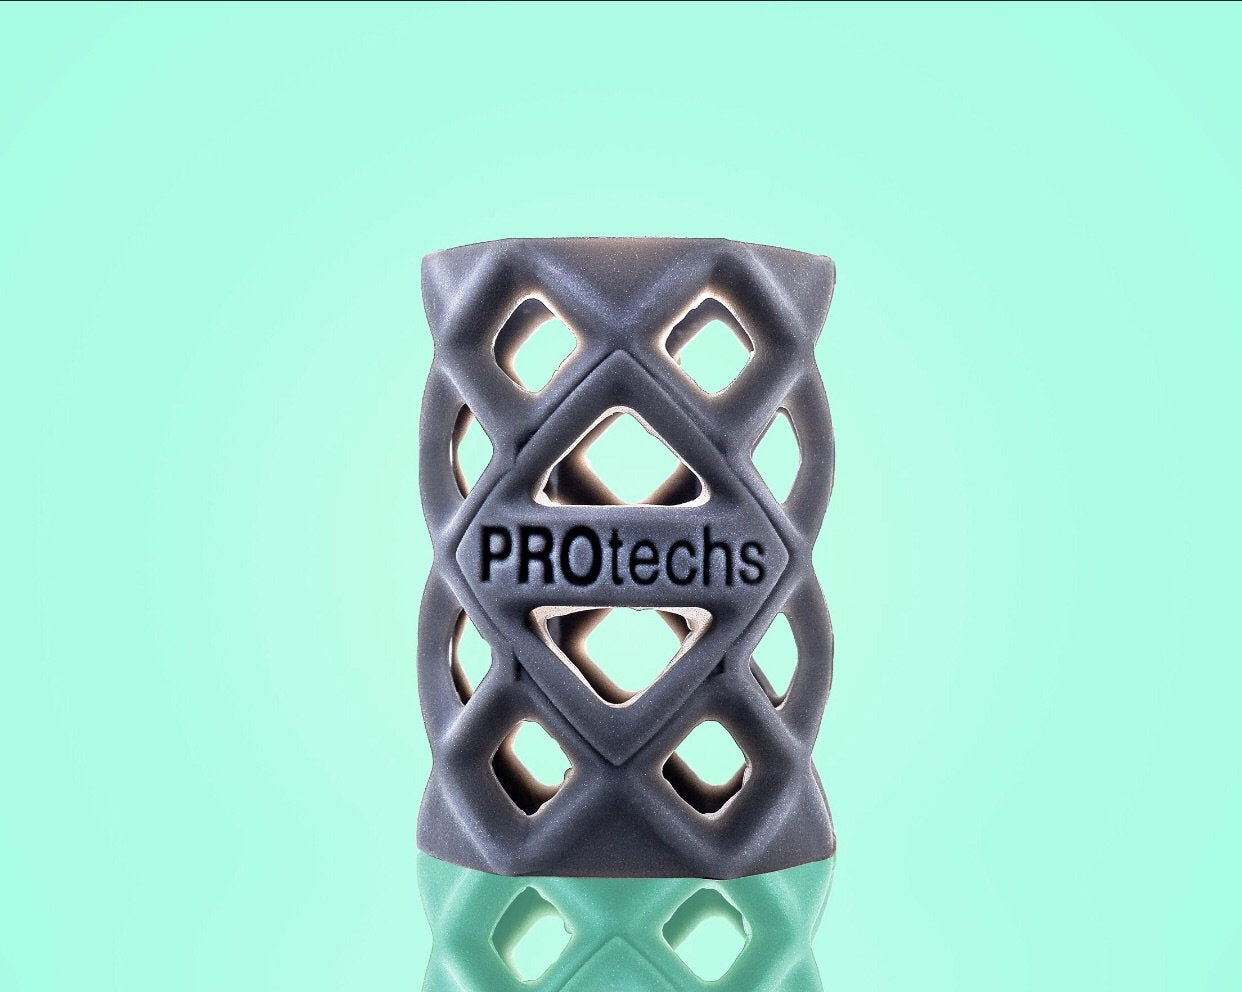 PROtechs v2.0 5 x Mixed Size Pieces